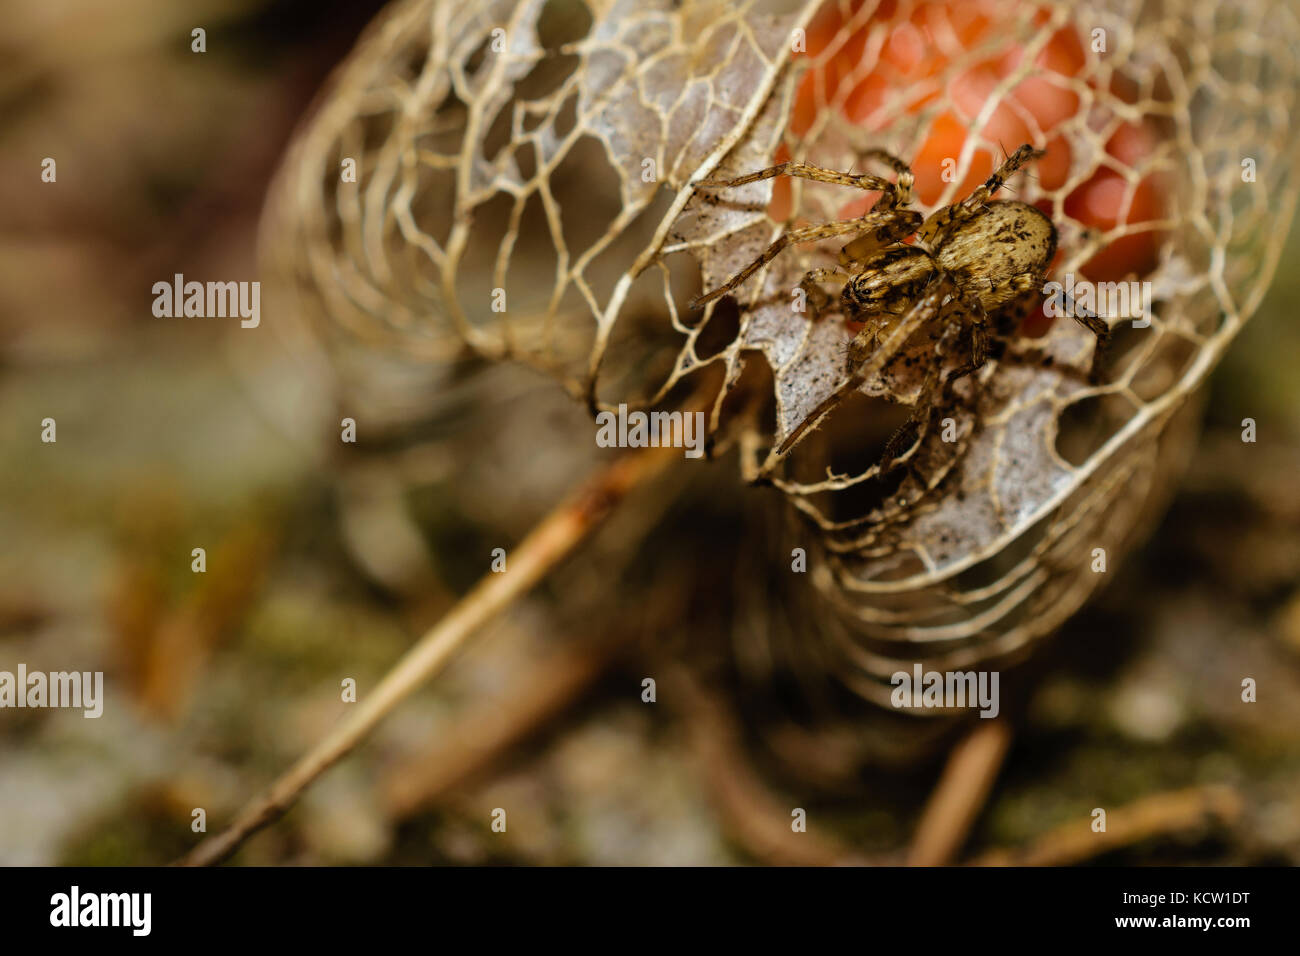 Extreme Close-Up Of Cute Small Spider On Dried Chinese Lantern Plant Or Physalis Alkekengi Looking At The Camera Stock Photo